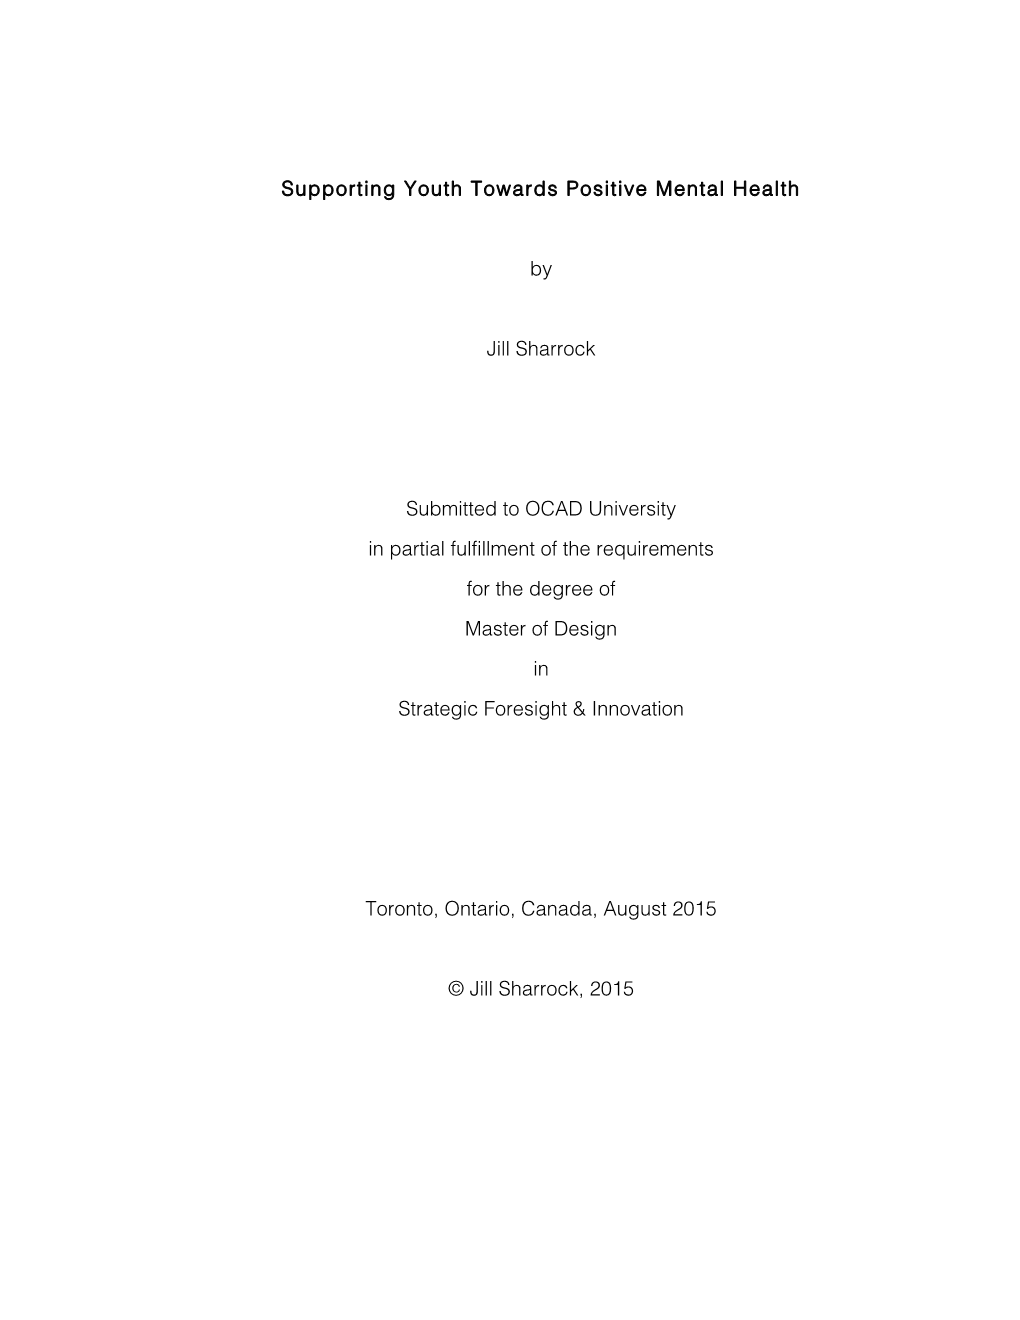 Supporting Youth Towards Positive Mental Health